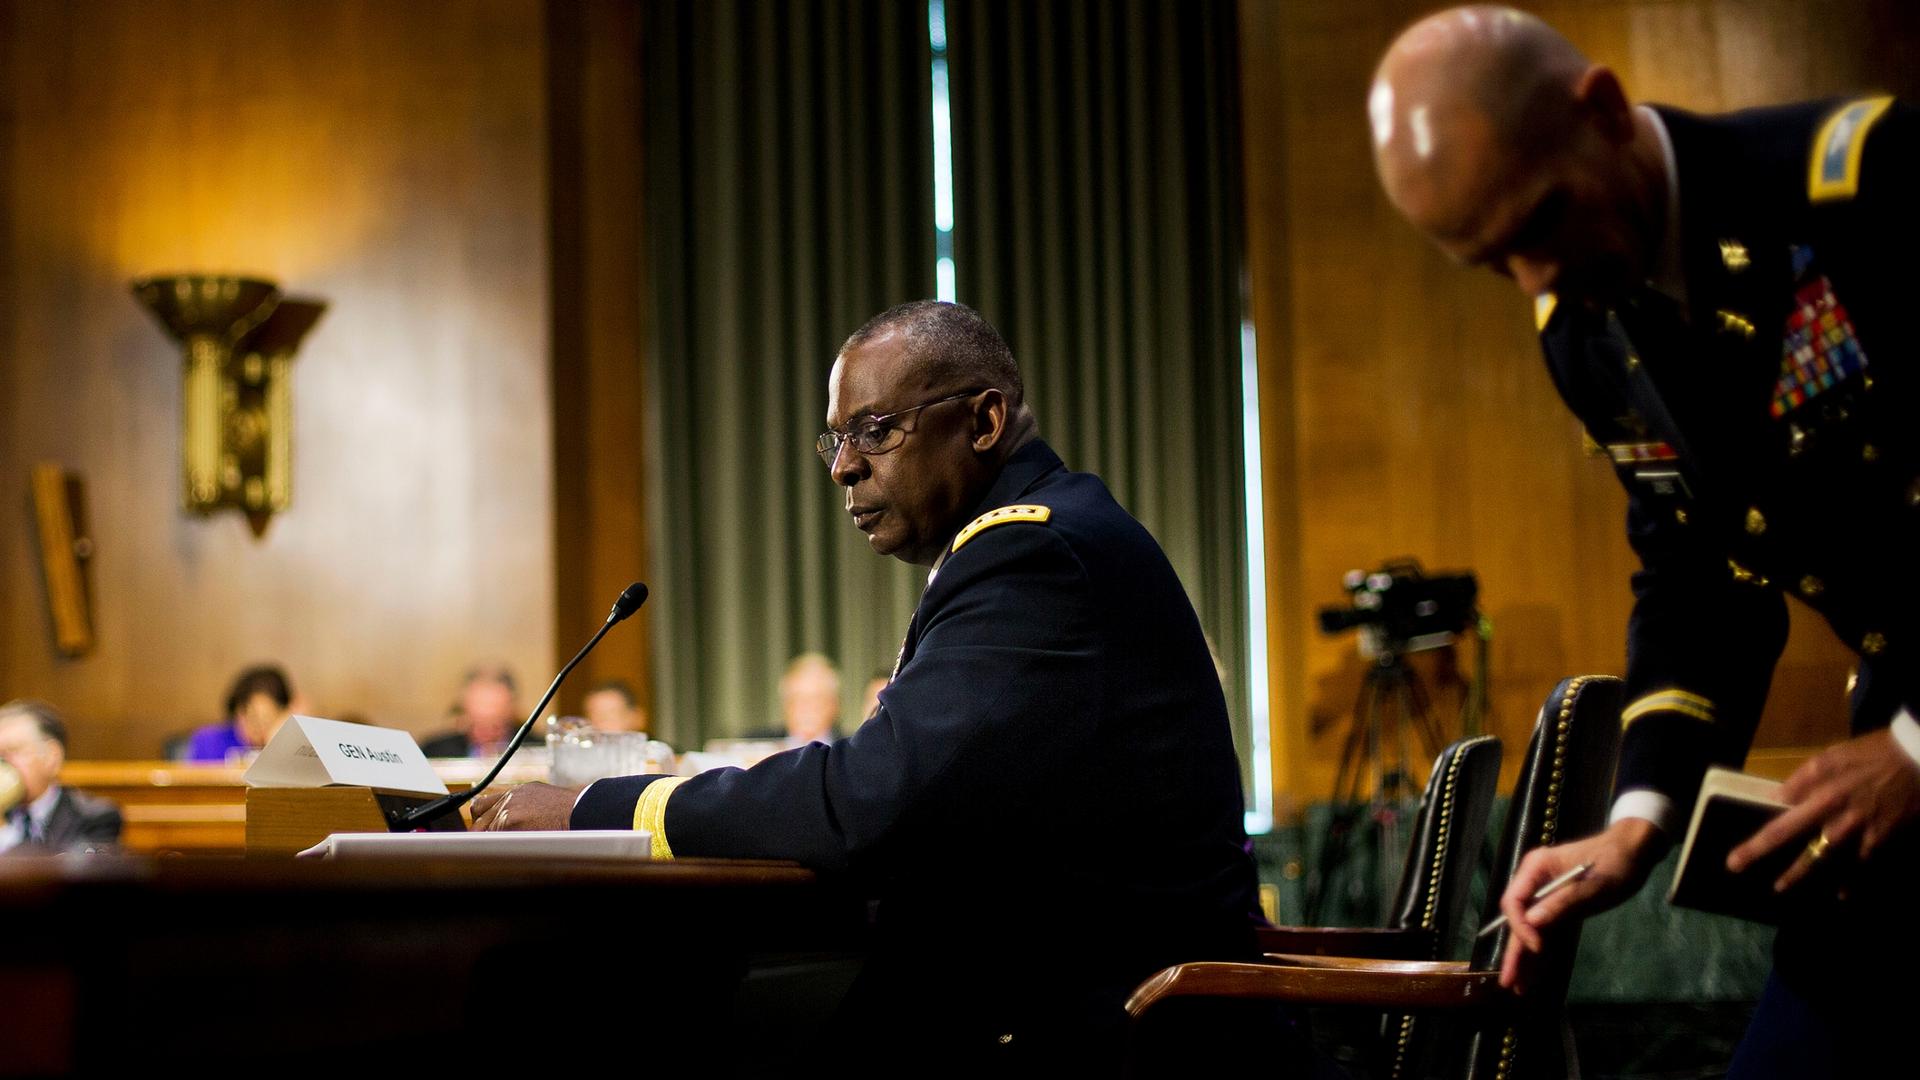 Then US Central Command Commander Gen. Lloyd Austin is shown seated at a large wooden table and behind a microphone.